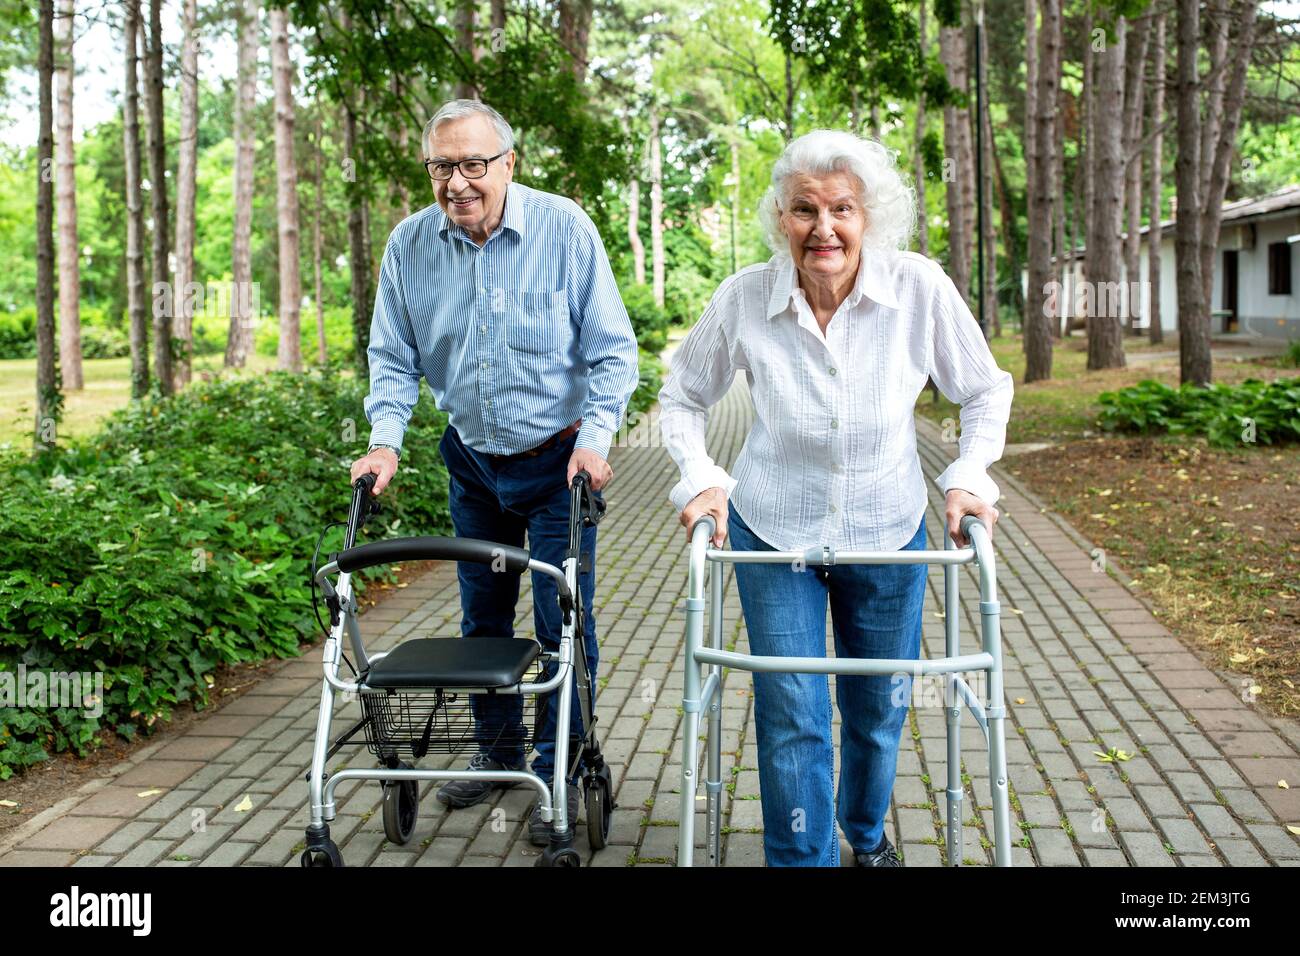 Elderly couple in the park strolling with walkers, senior citizen concept Stock Photo